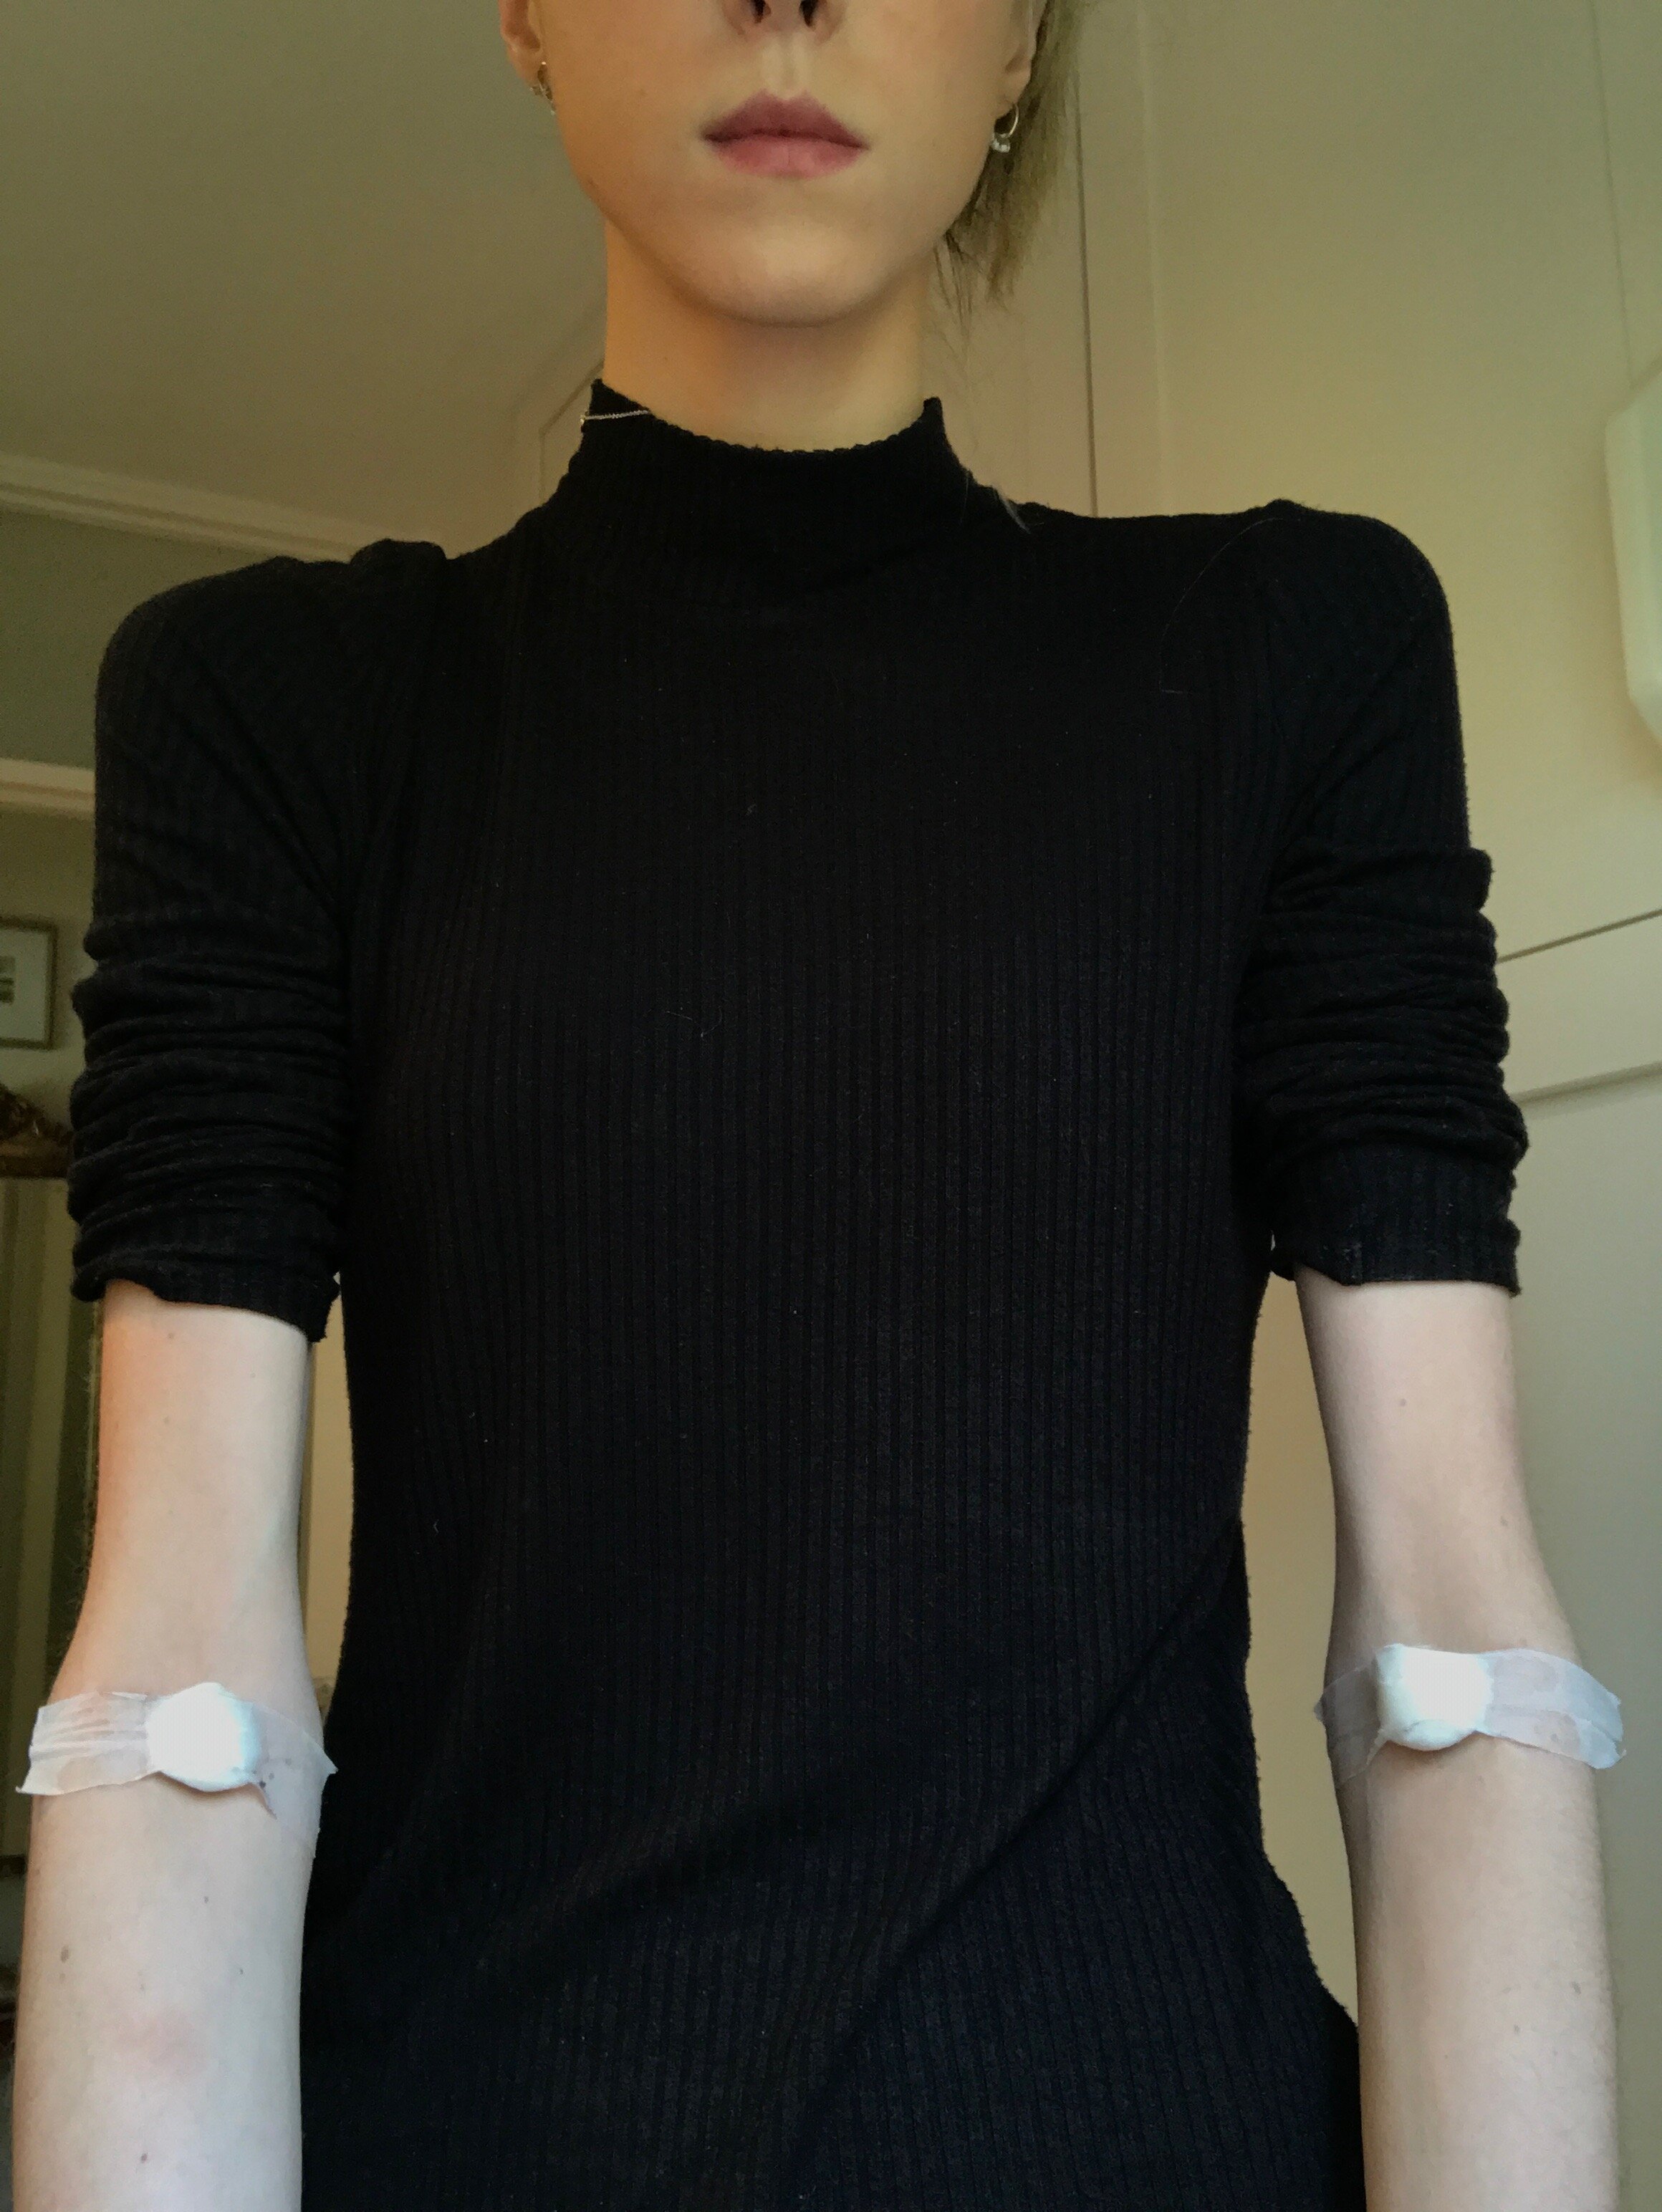 My week in a photo: blood tests, blood tests, and more blood tests...